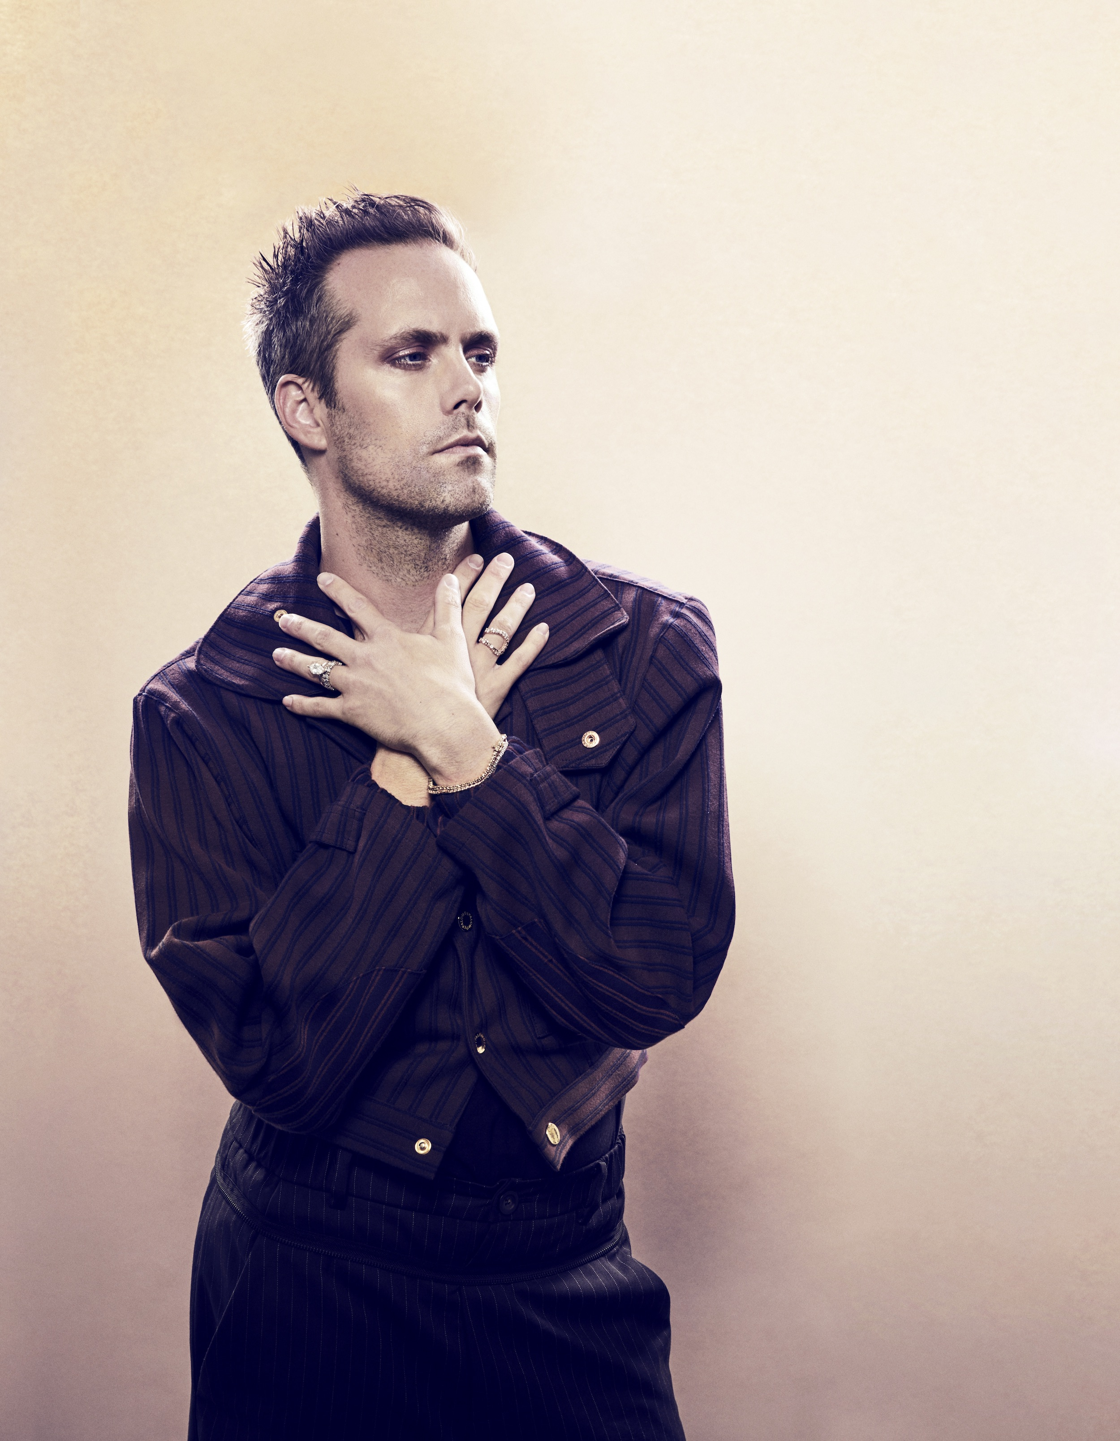 Celebrated Activist, Songwriter Justin Tranter donates over half a million dollars to alma mater